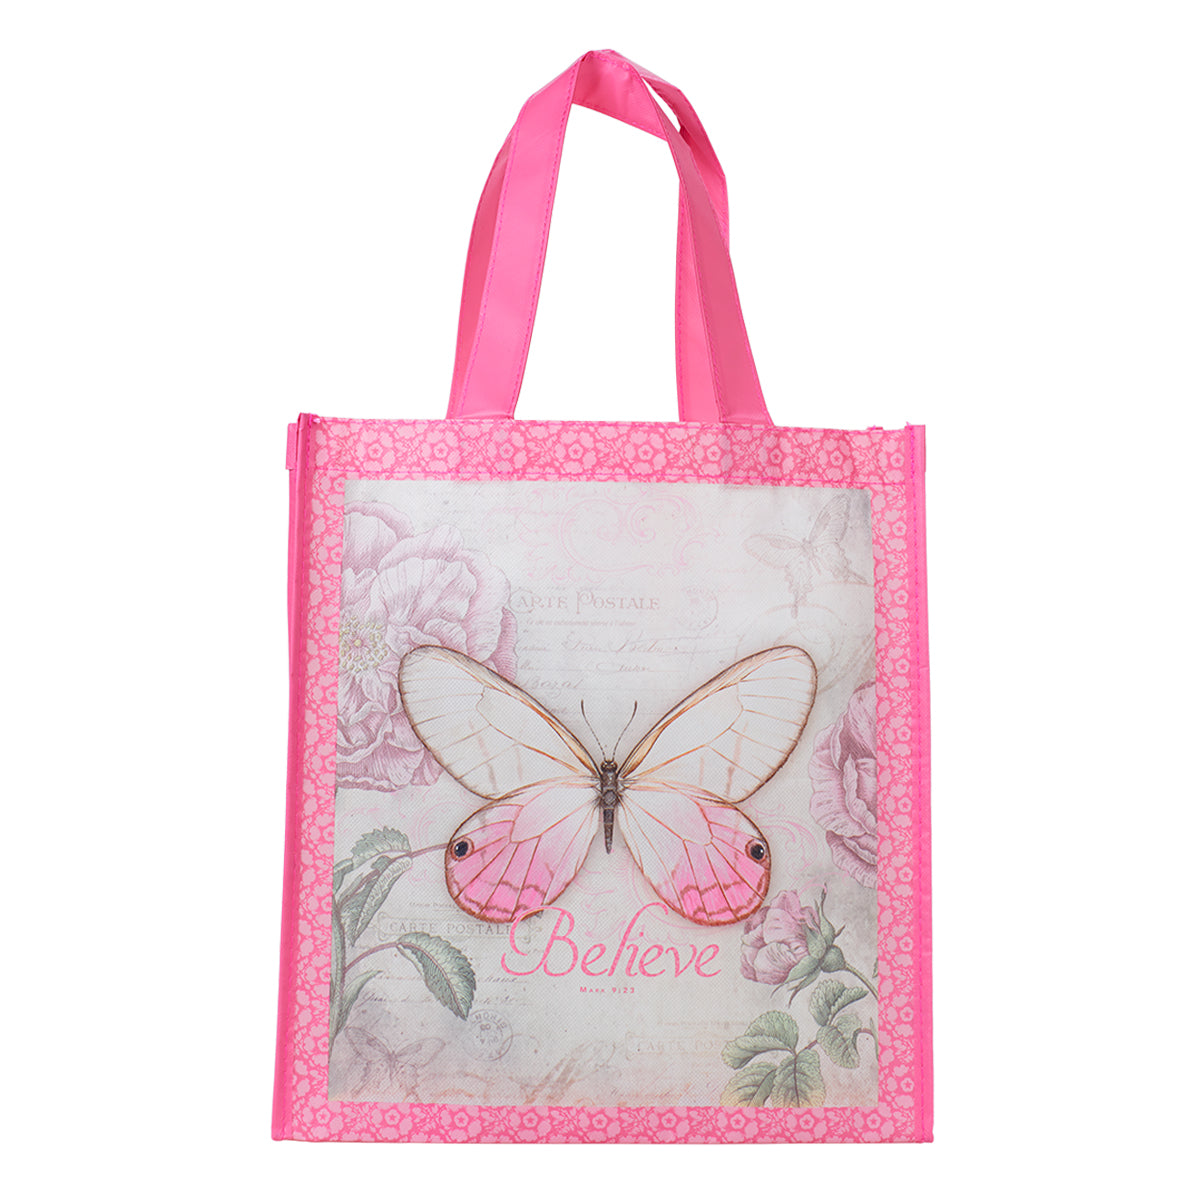 Believe Pink Butterfly Shopping Bag - The Christian Gift Company